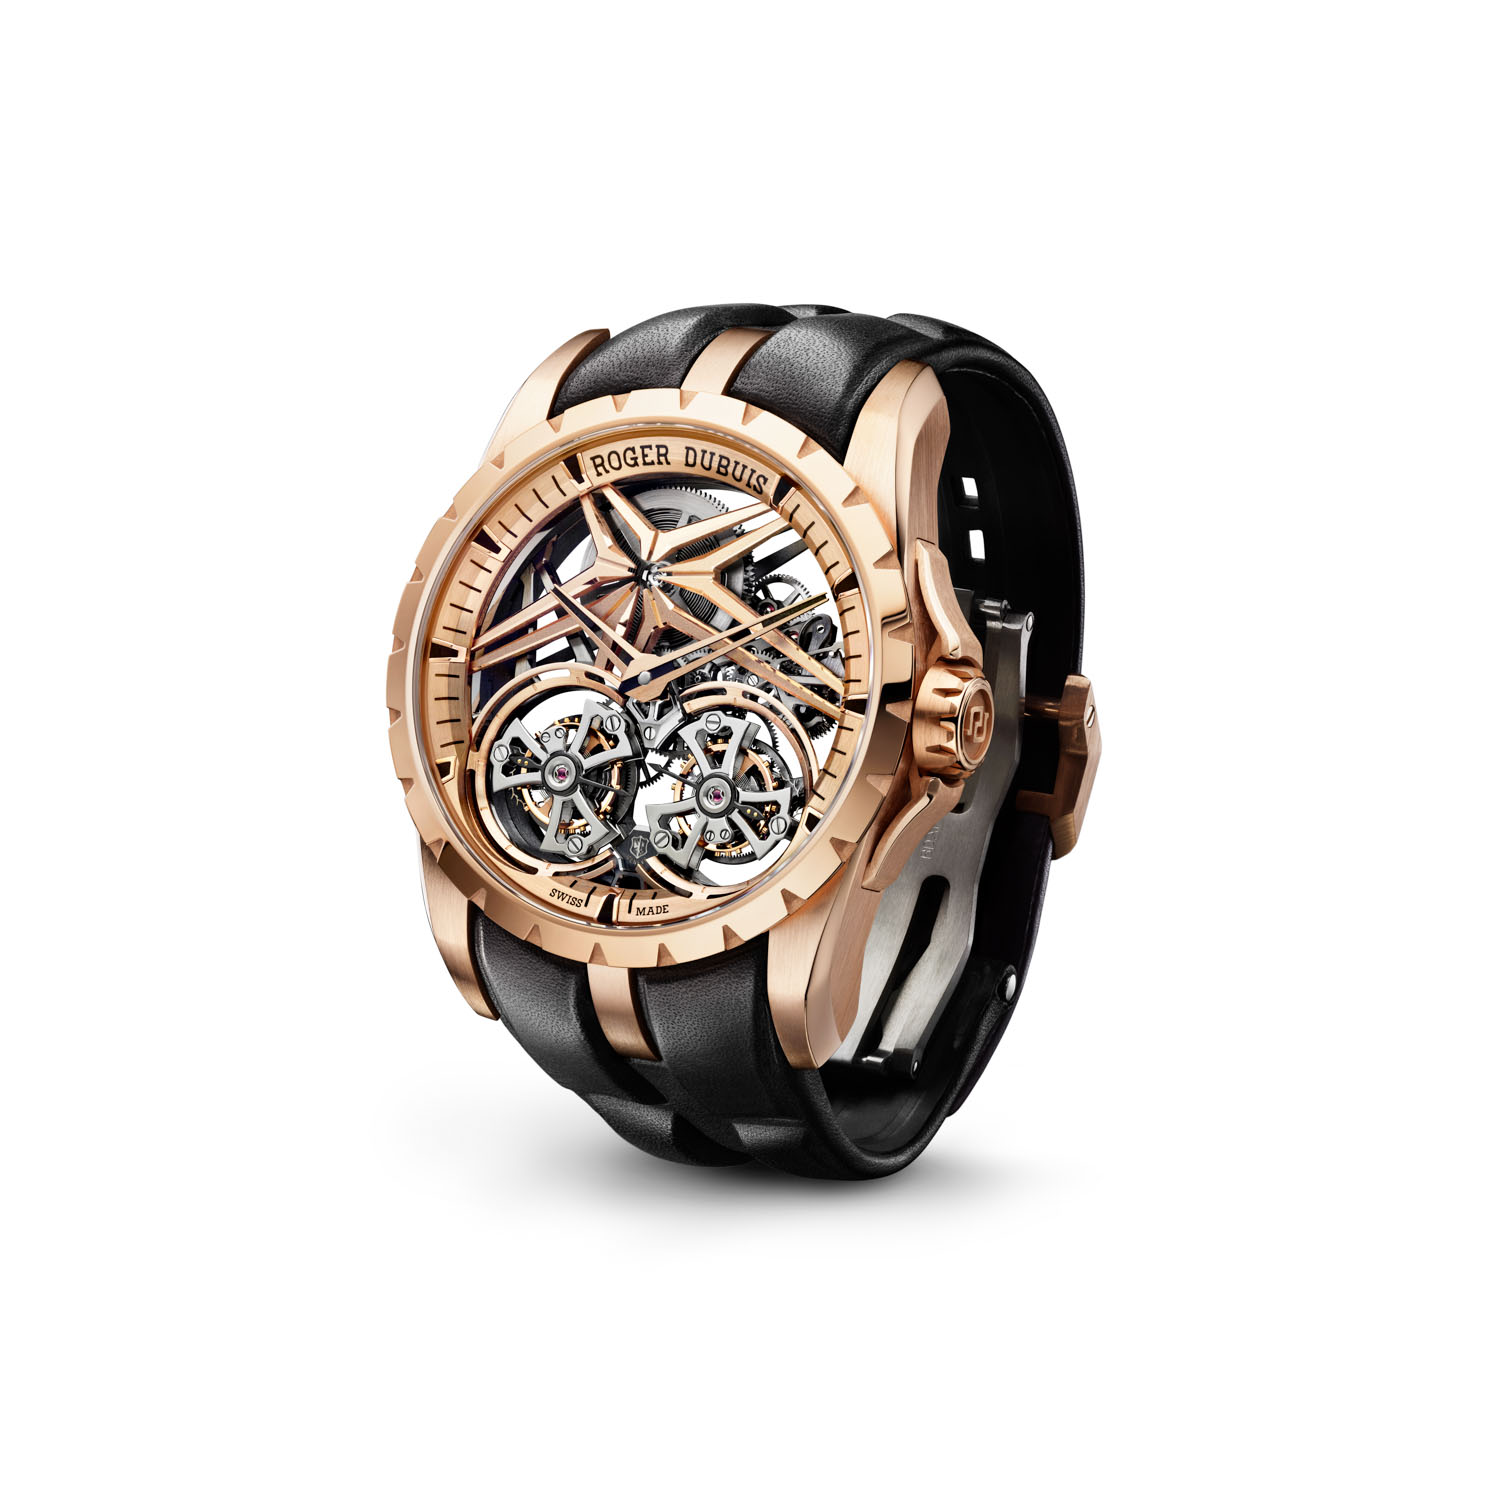 The 2021 Excalibur Double Flying Tourbillon ref. RDDBEX0920 in a 45mm pink gold case (Limited edition of 8 pieces)